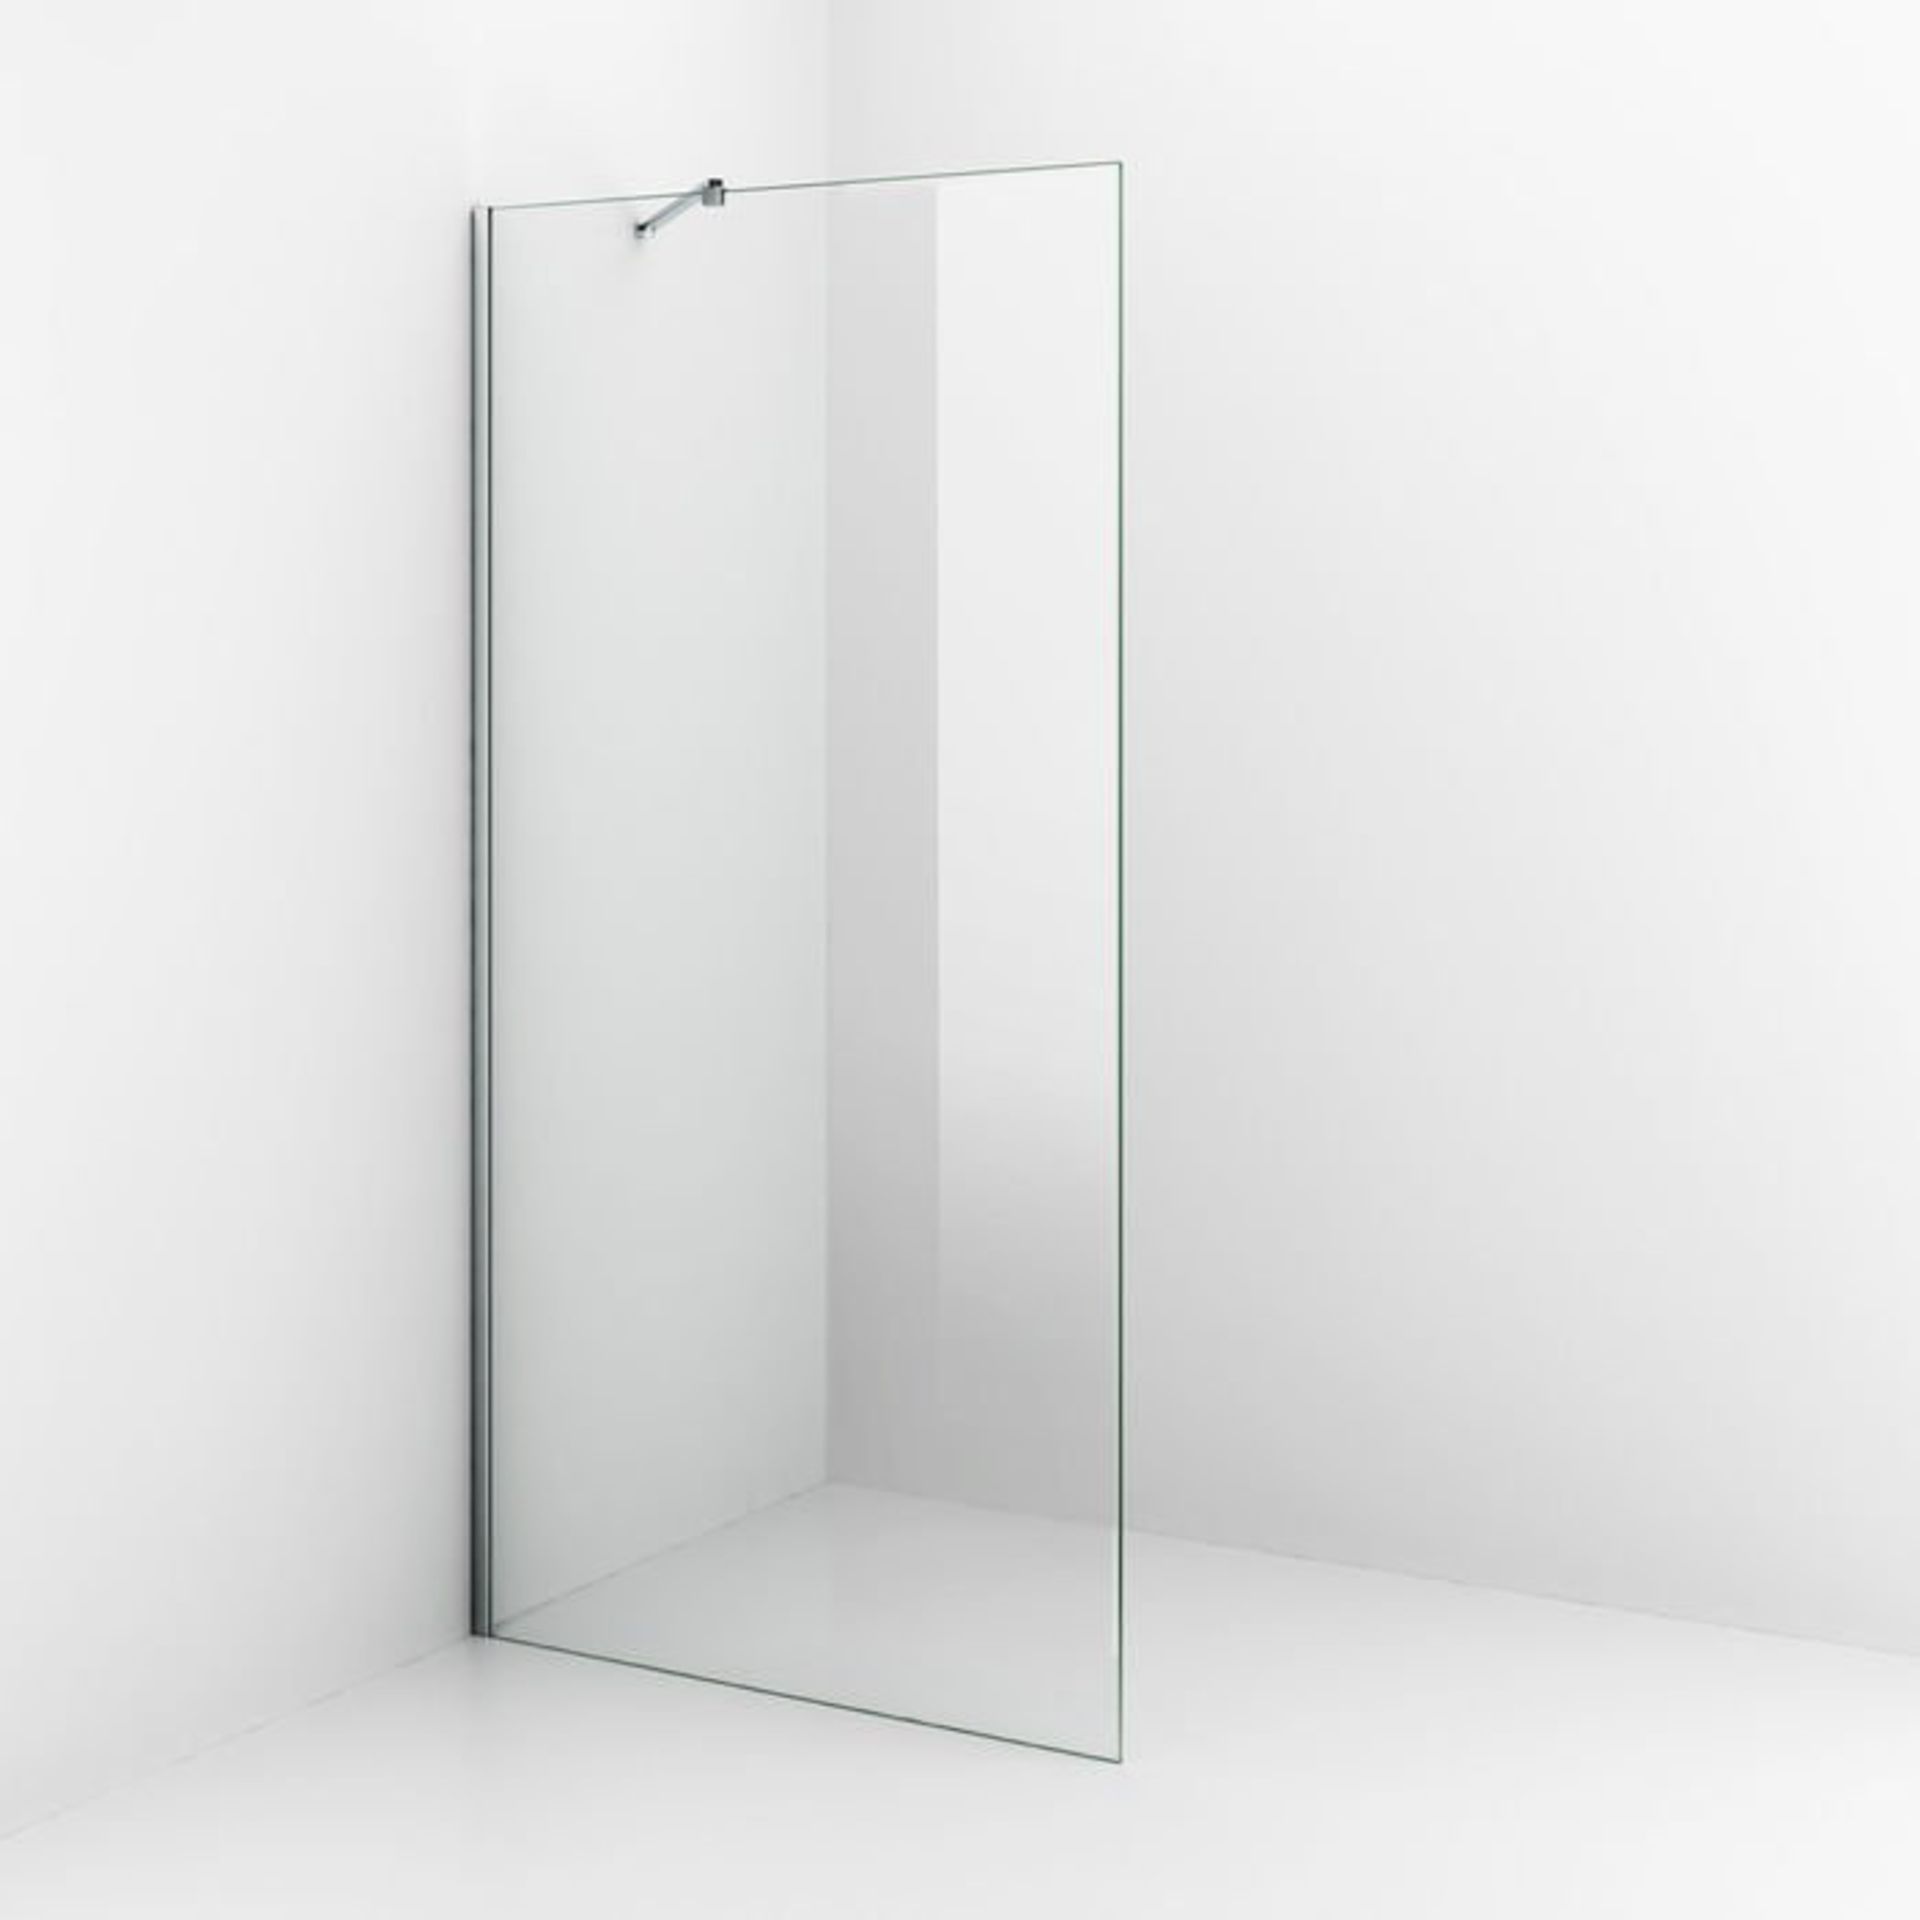 (G45) 1200mm - 8mm - Premium EasyClean Wetroom Panel RRP £499.99 8mm EasyClean glass - Our glass has - Image 3 of 6